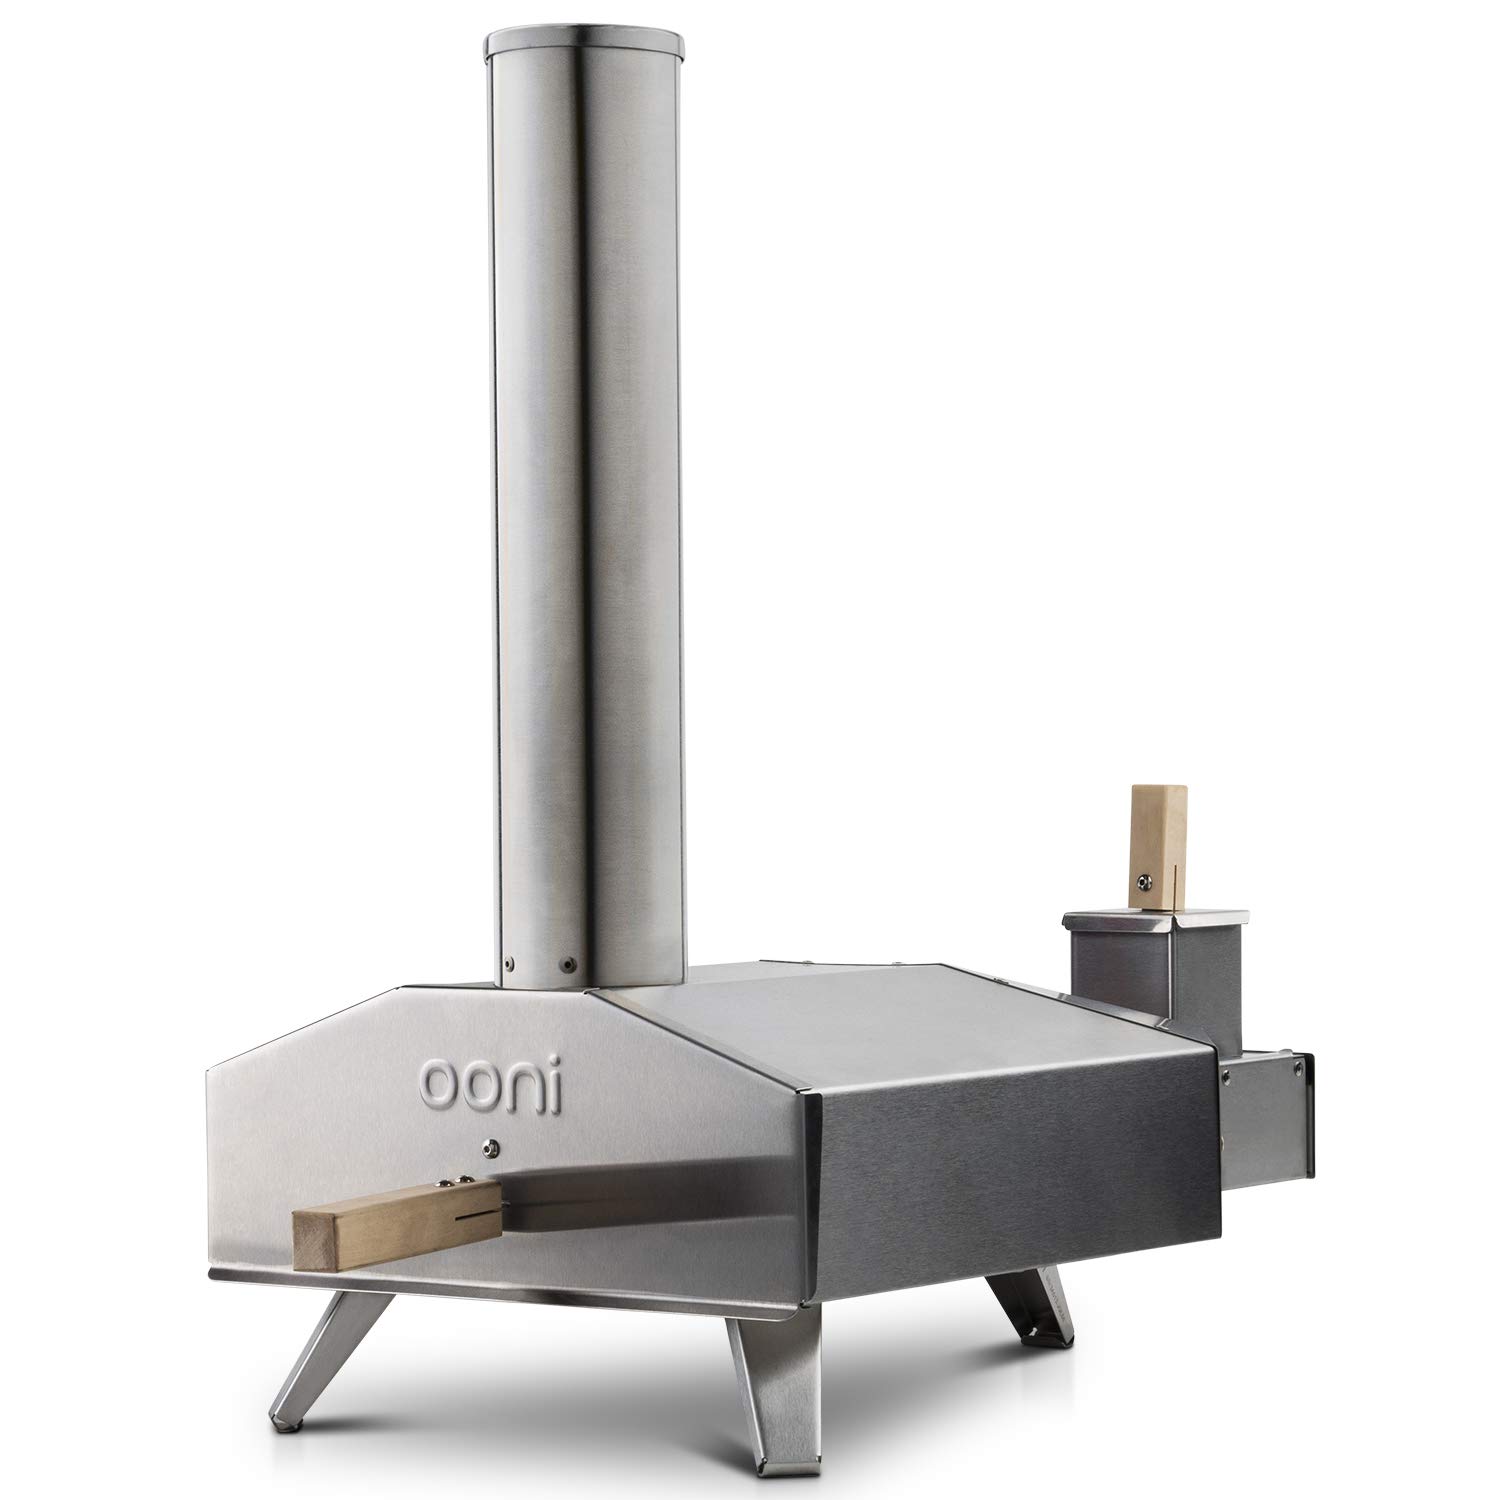 Book Cover Ooni 3 Outdoor Pizza Oven, Pizza Maker, Portable Oven, Outdoor Cooking, Award Winning Pizza Oven